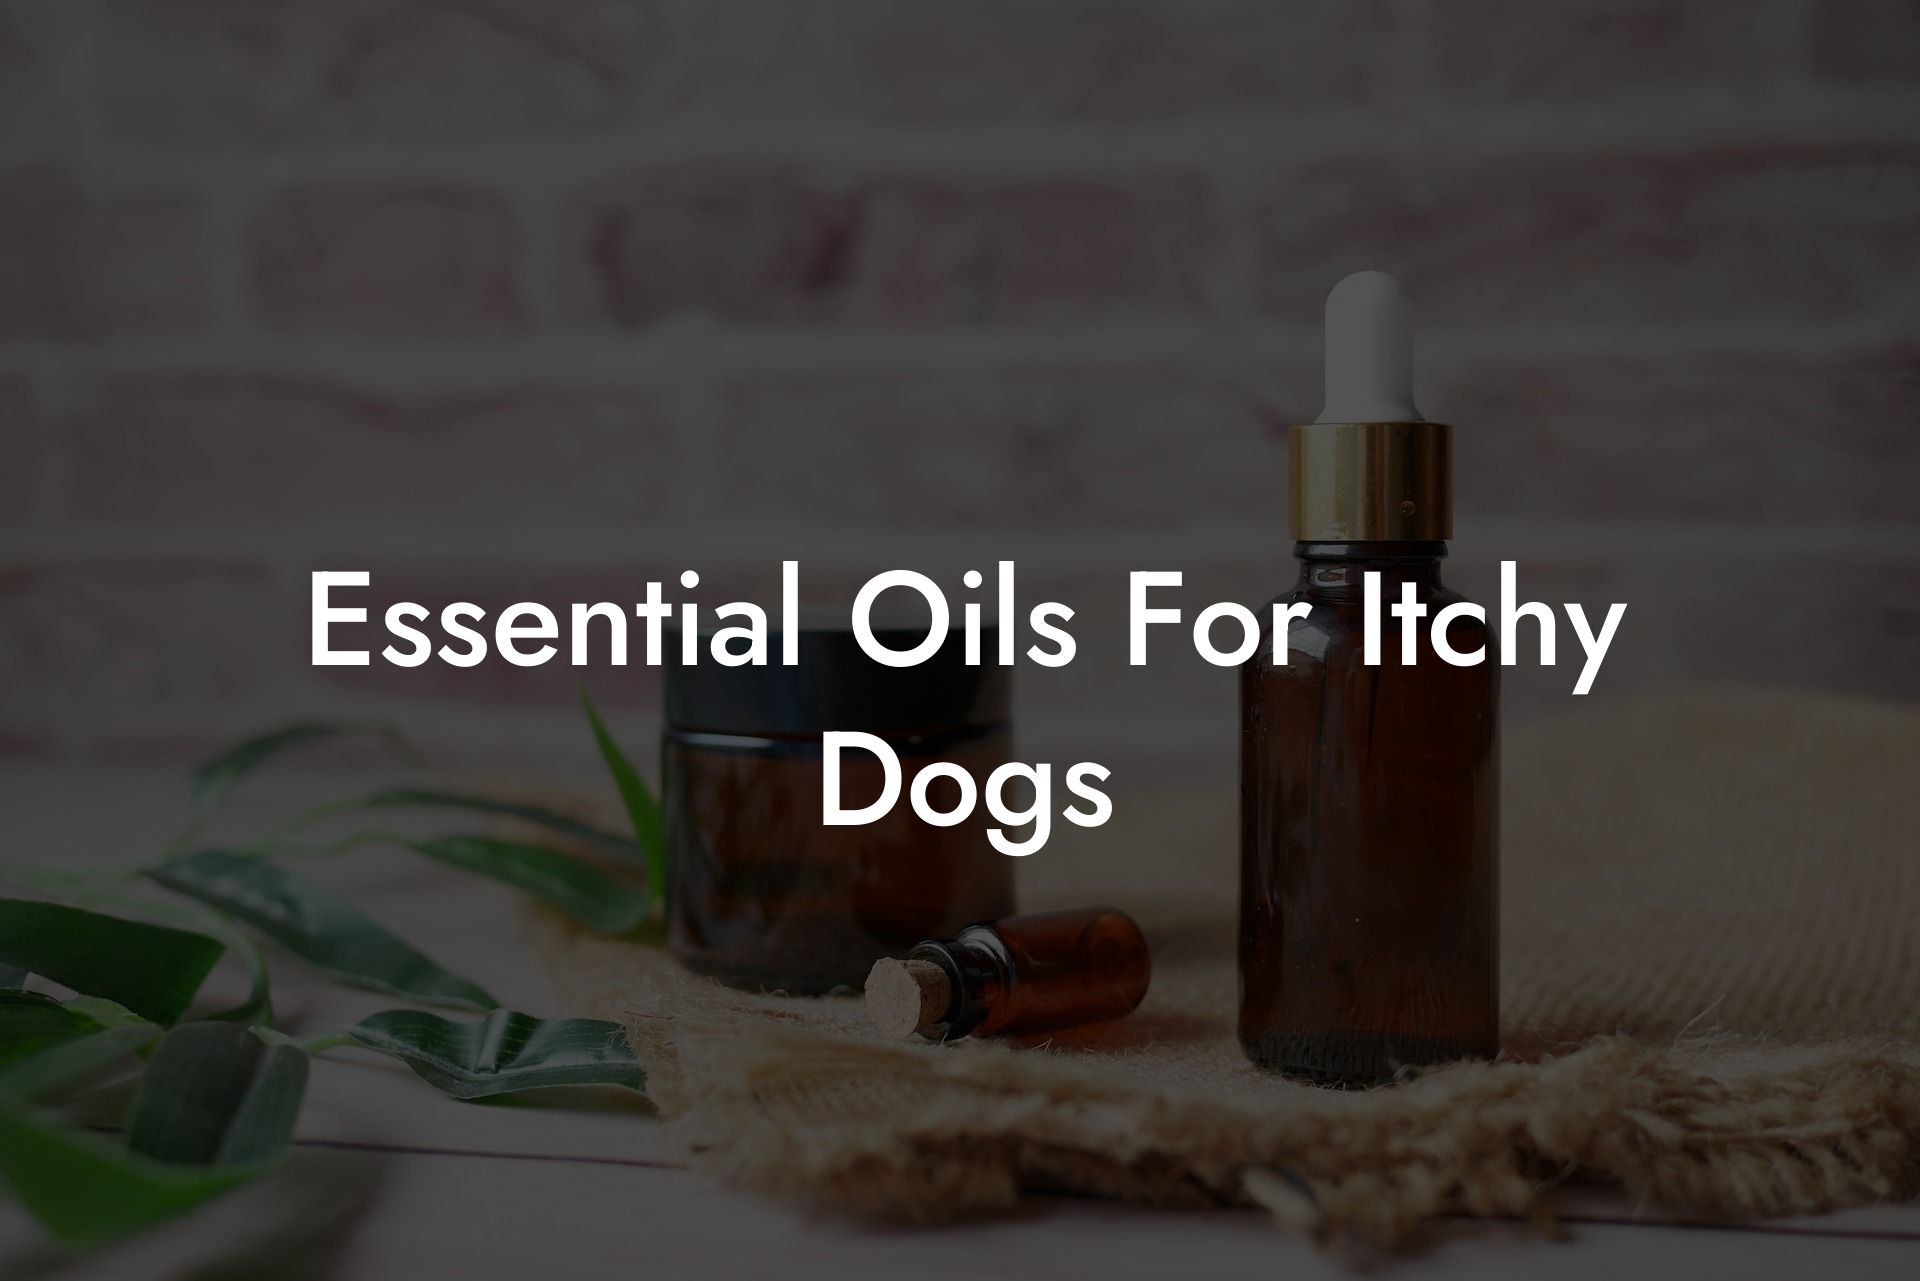 Essential Oils For Itchy Dogs